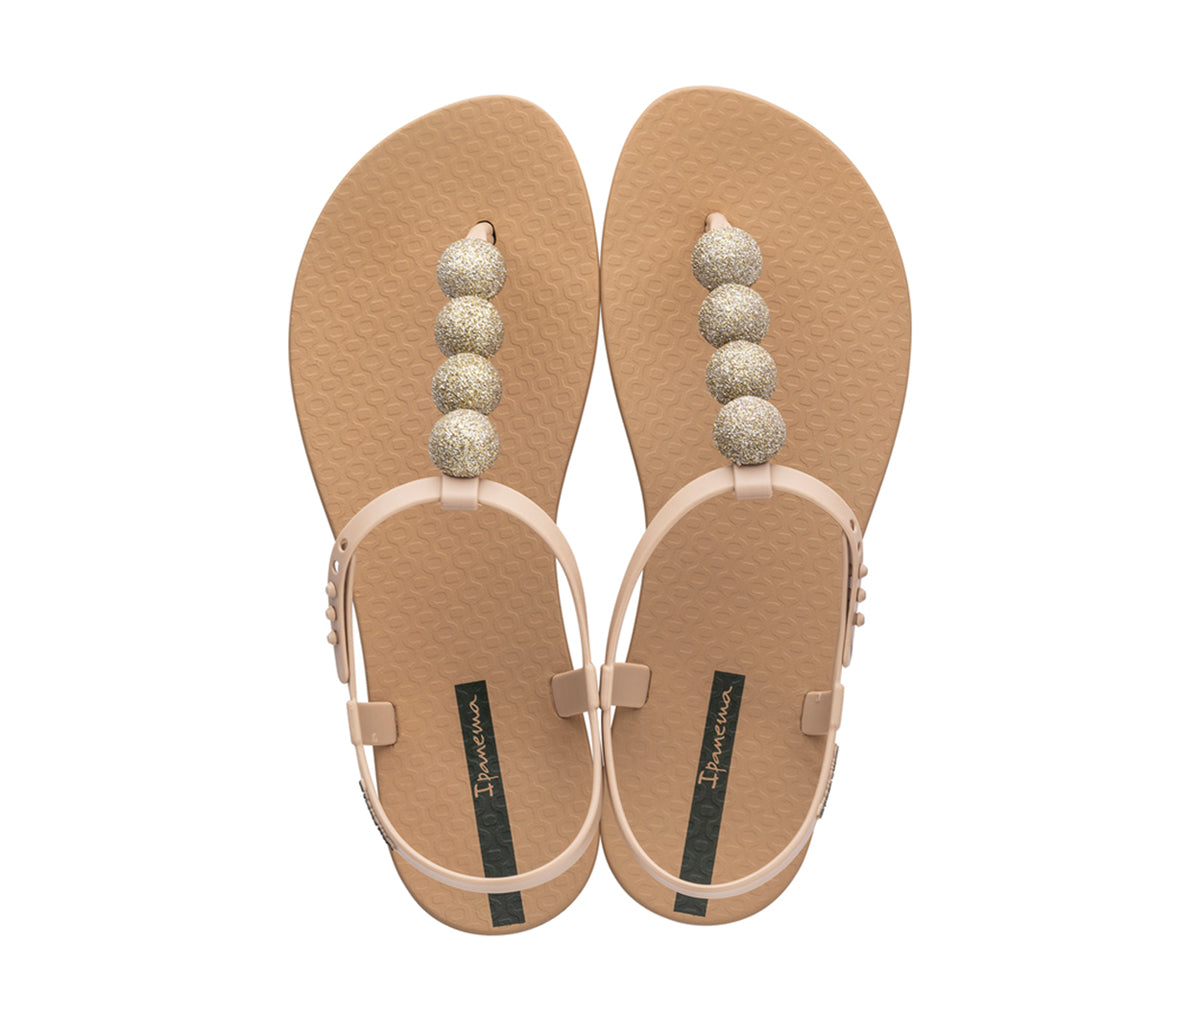 Top view of a pair of beige Ipanema Disco sandals with straps and 4 glitter balls on top strap.